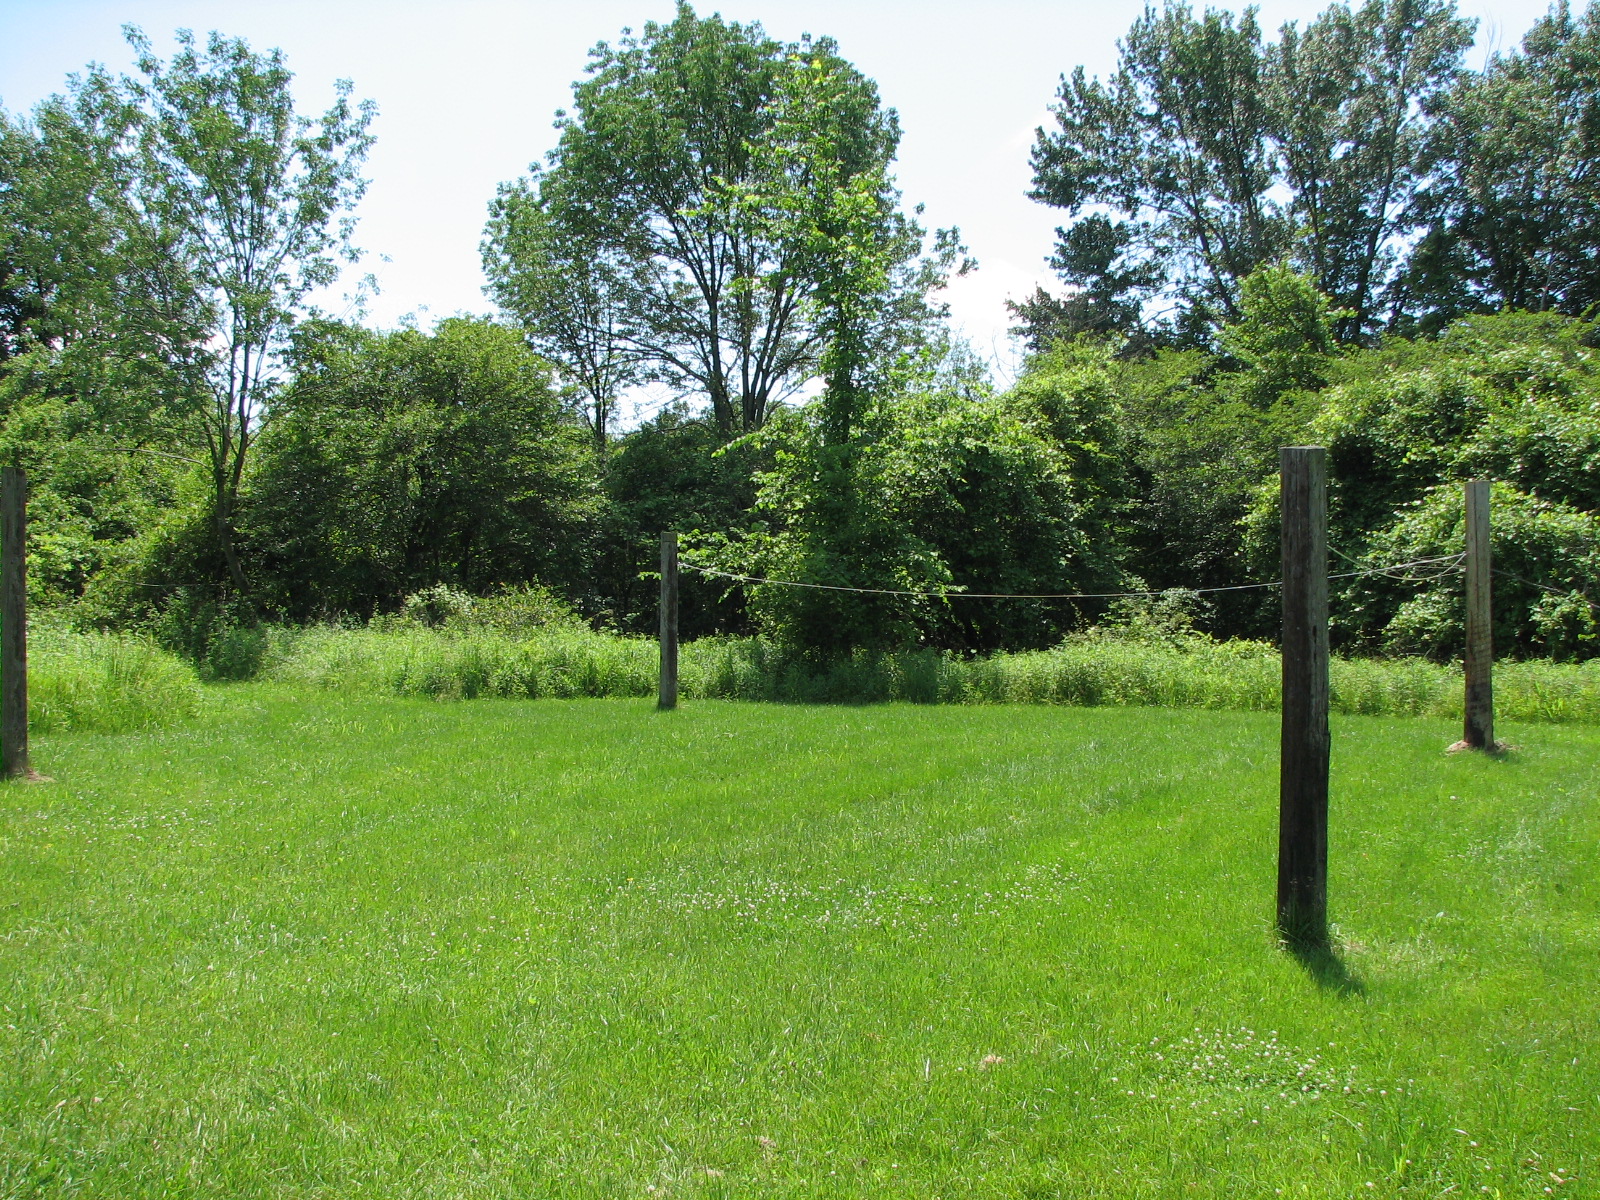 Hitching post at Charlemont Reservation